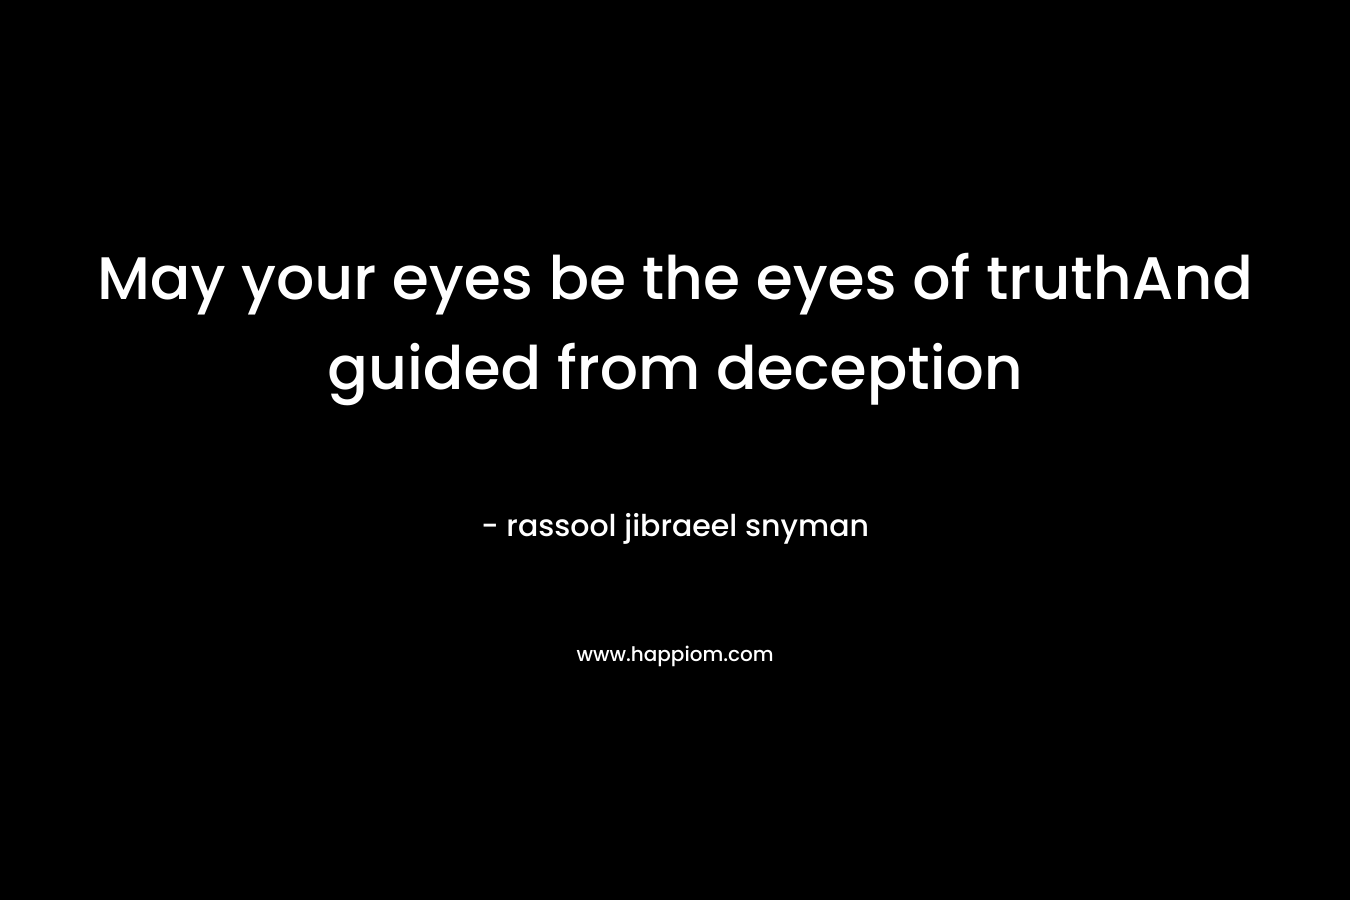 May your eyes be the eyes of truthAnd guided from deception